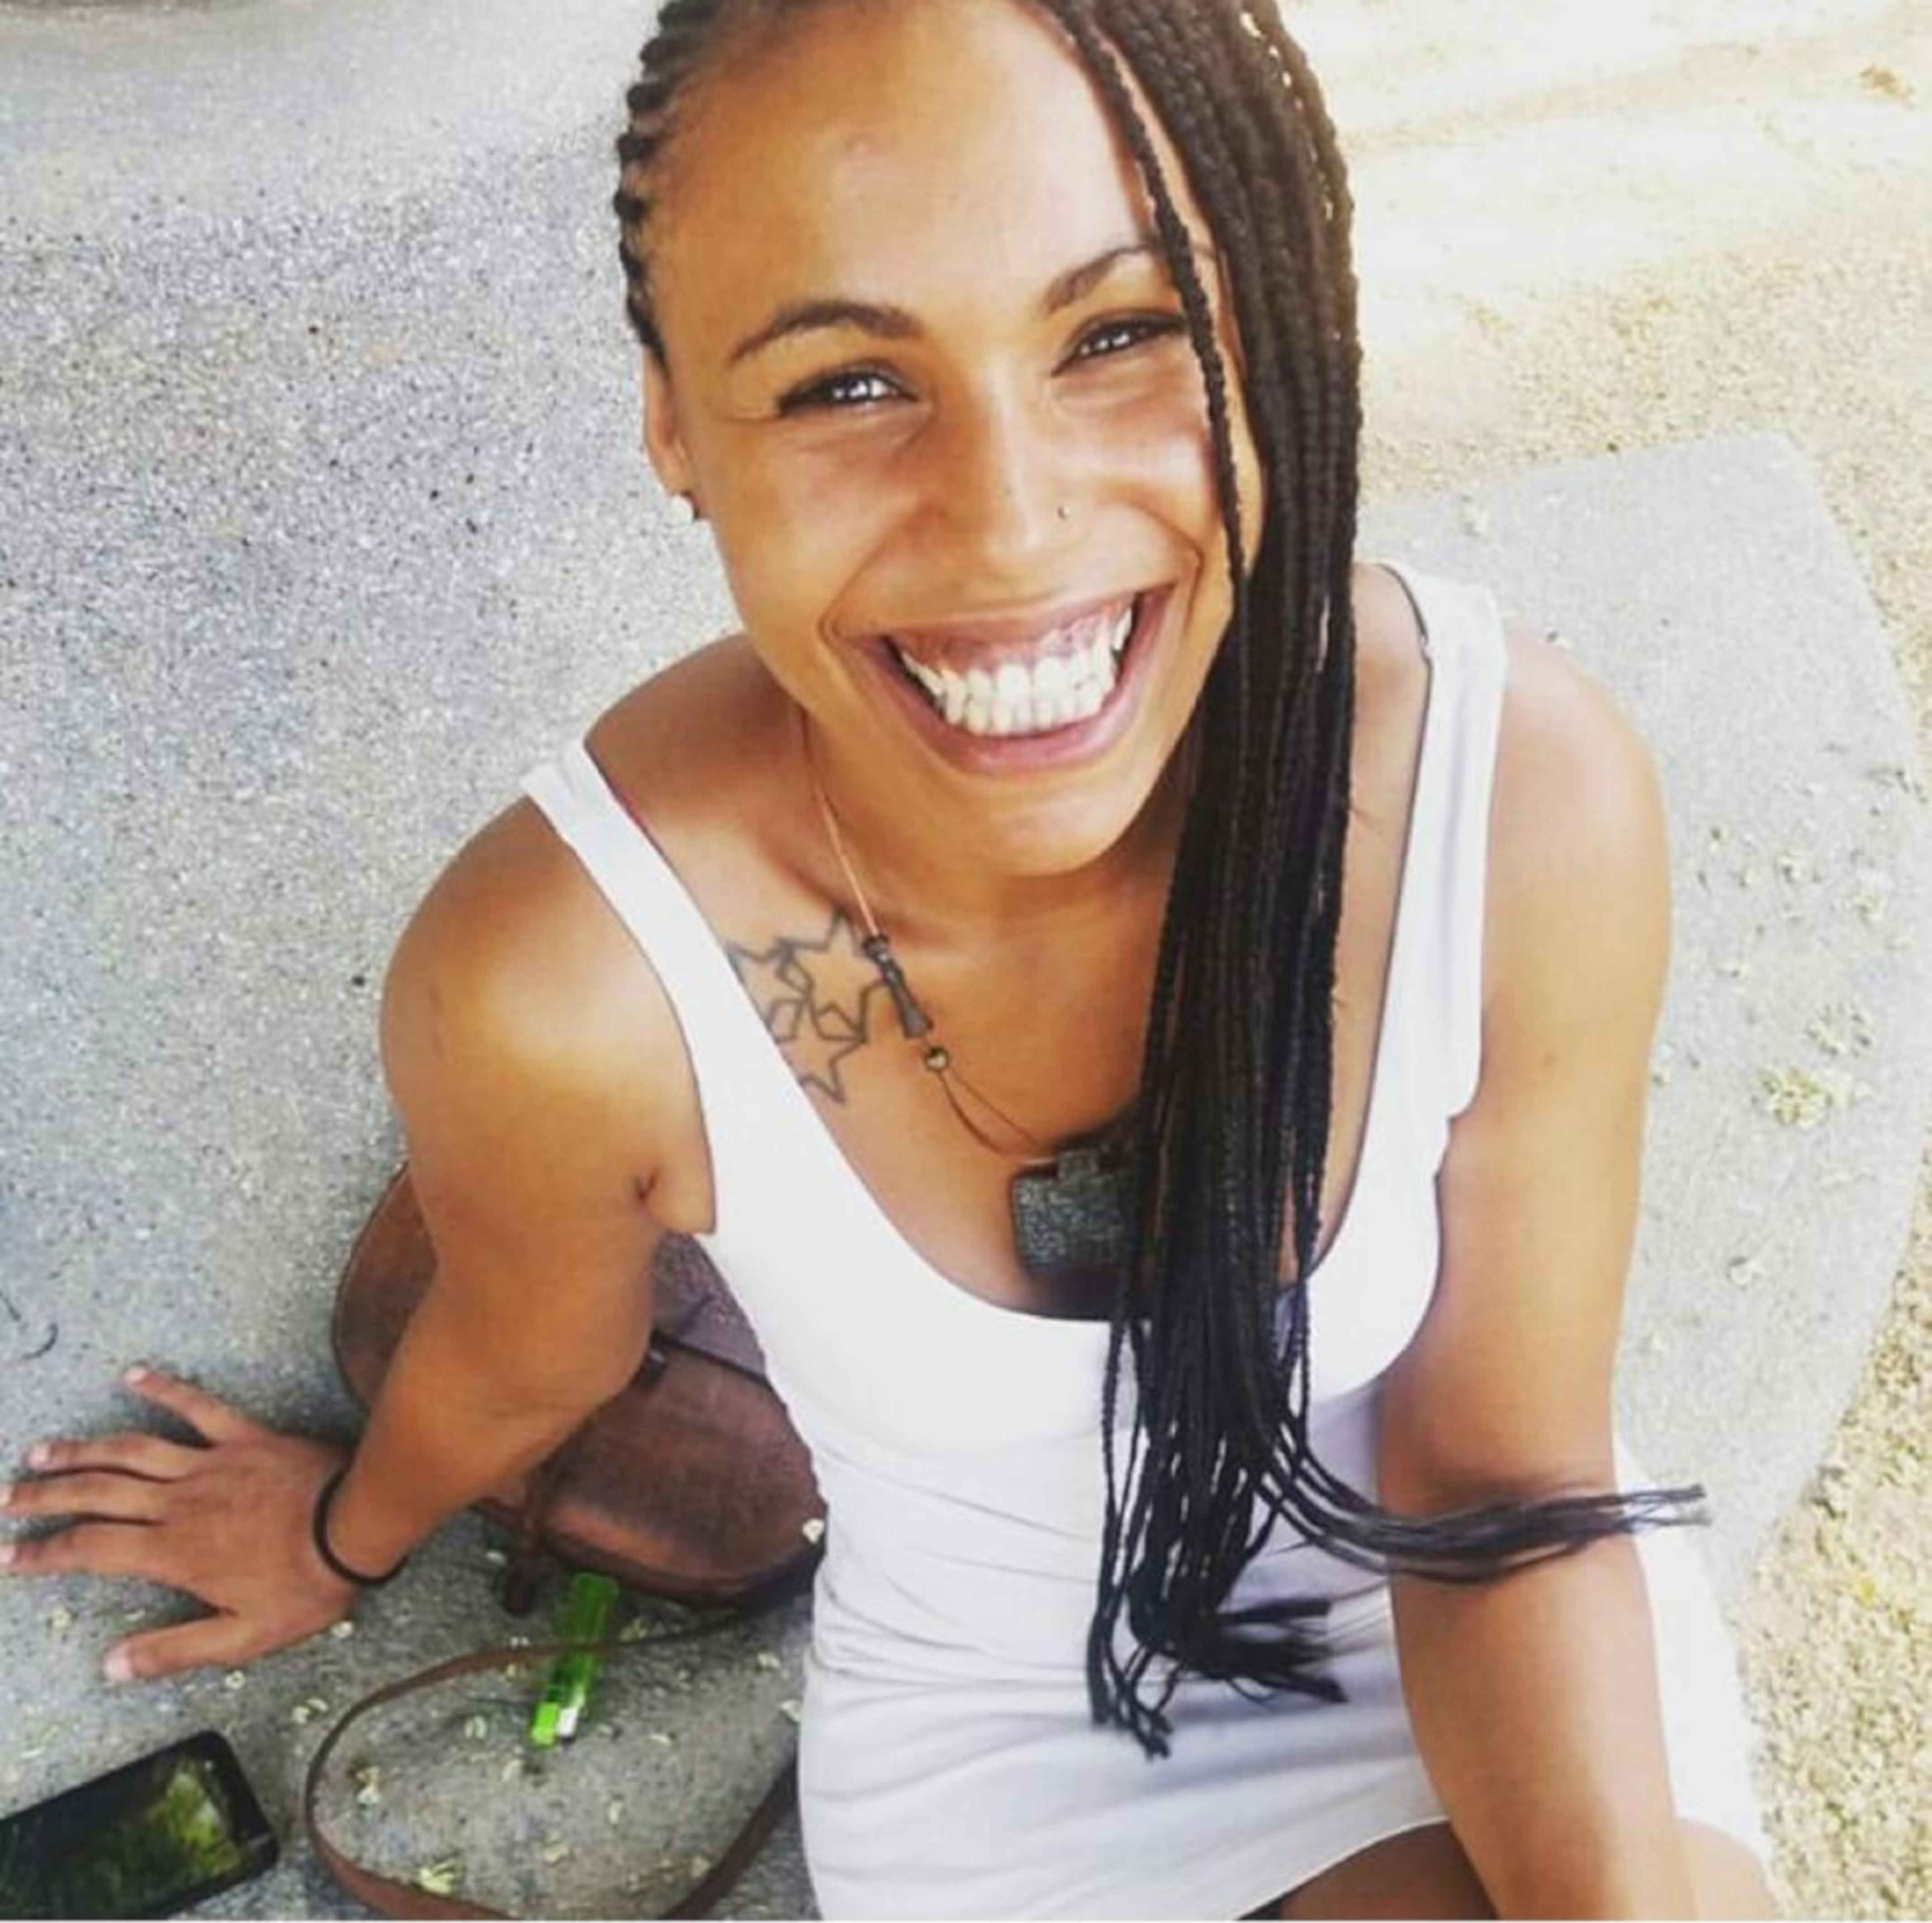 Jennifer Molina, a journalist and the spokesperson for the Black, African and Afro-descendant Community in Spain